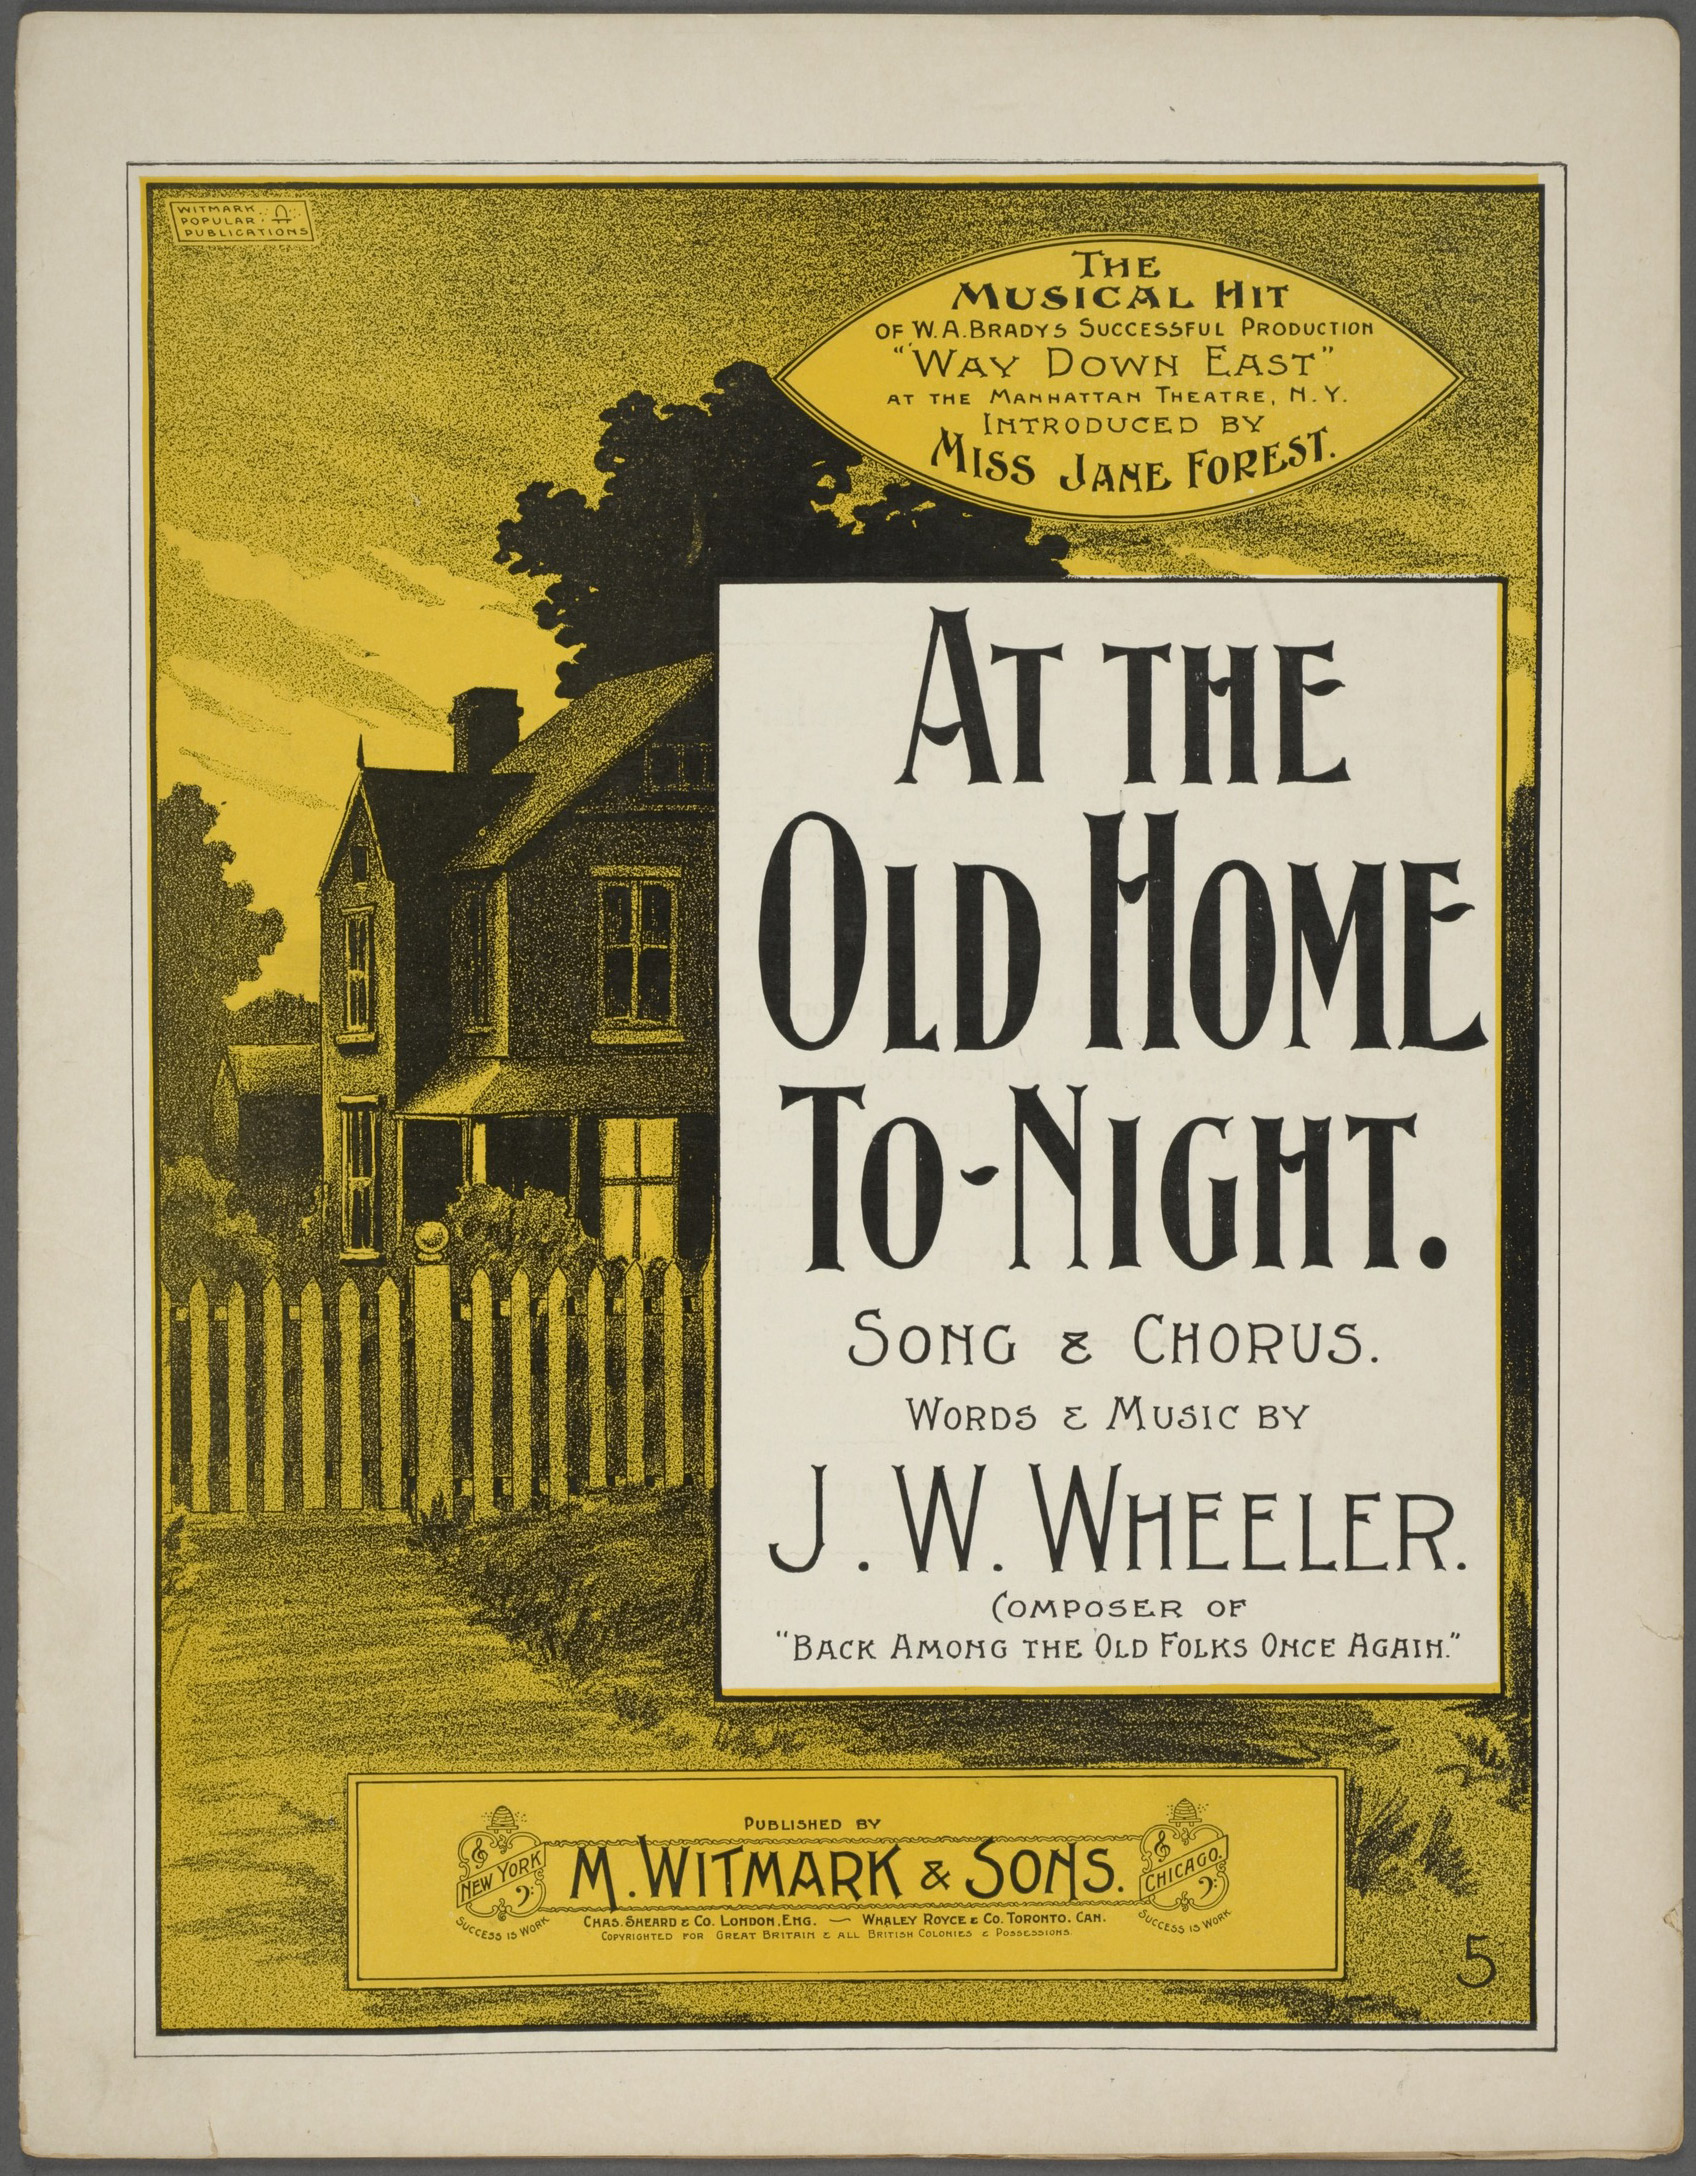 Sheet Music from the New York Public Library